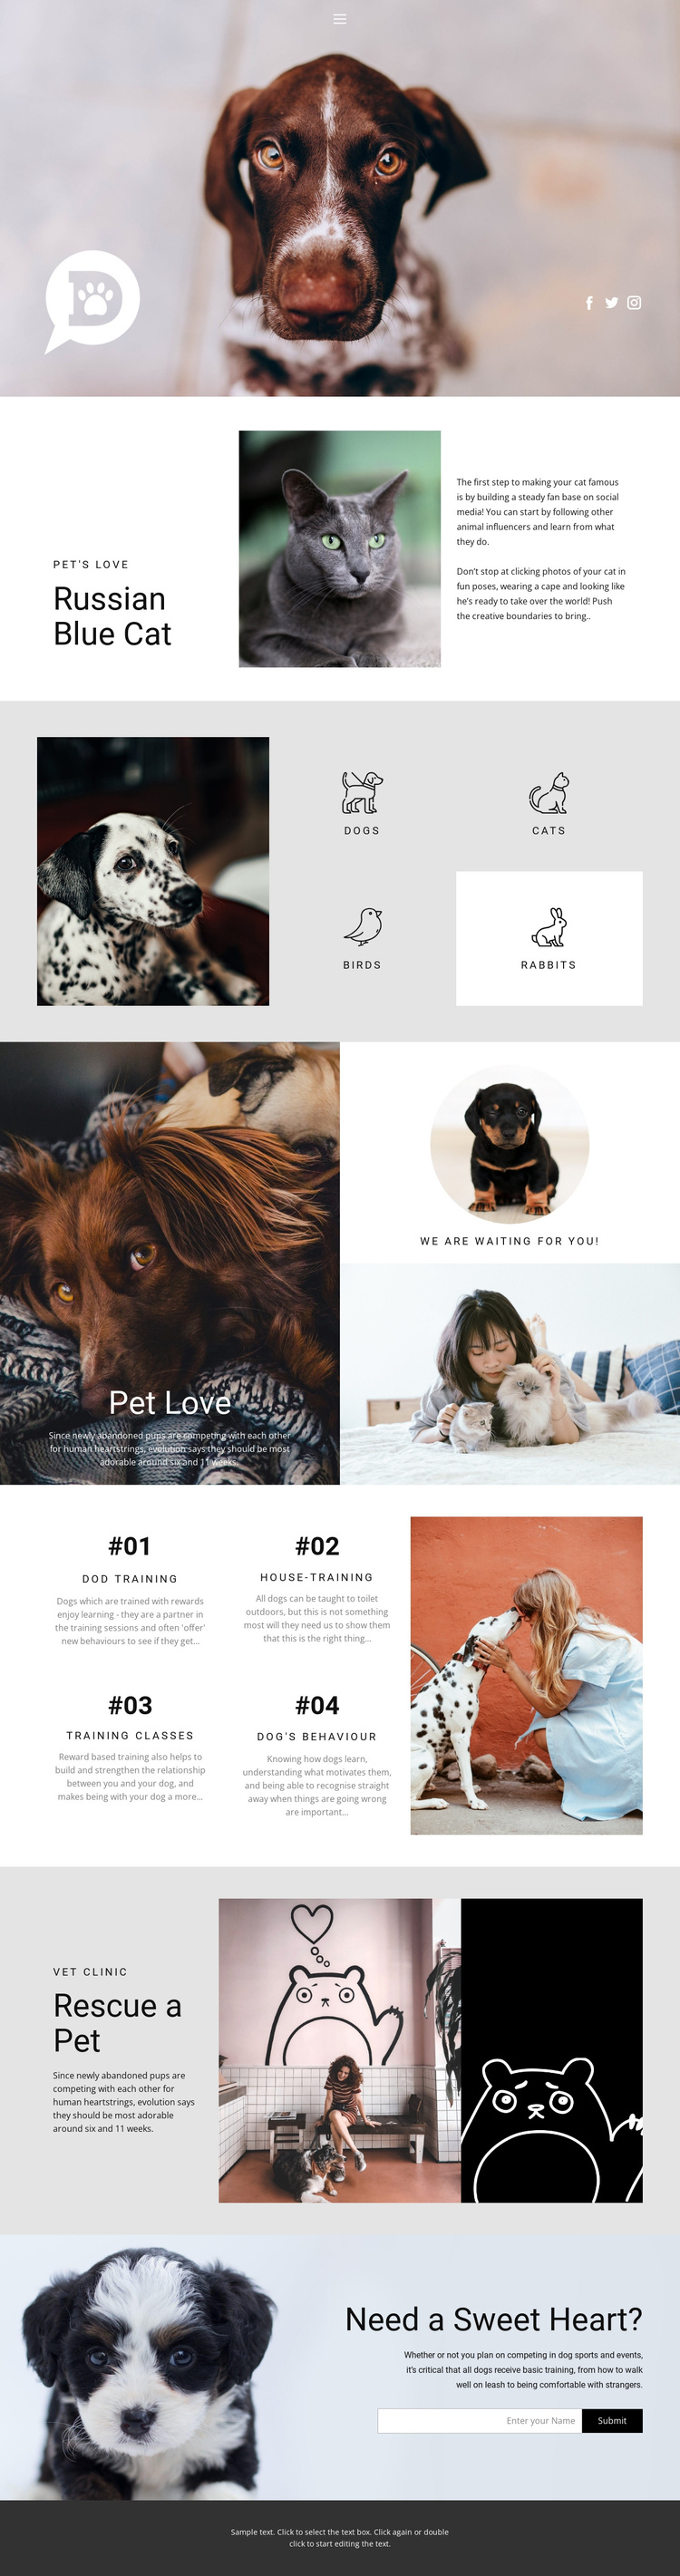 Care for pets and animals Joomla Template